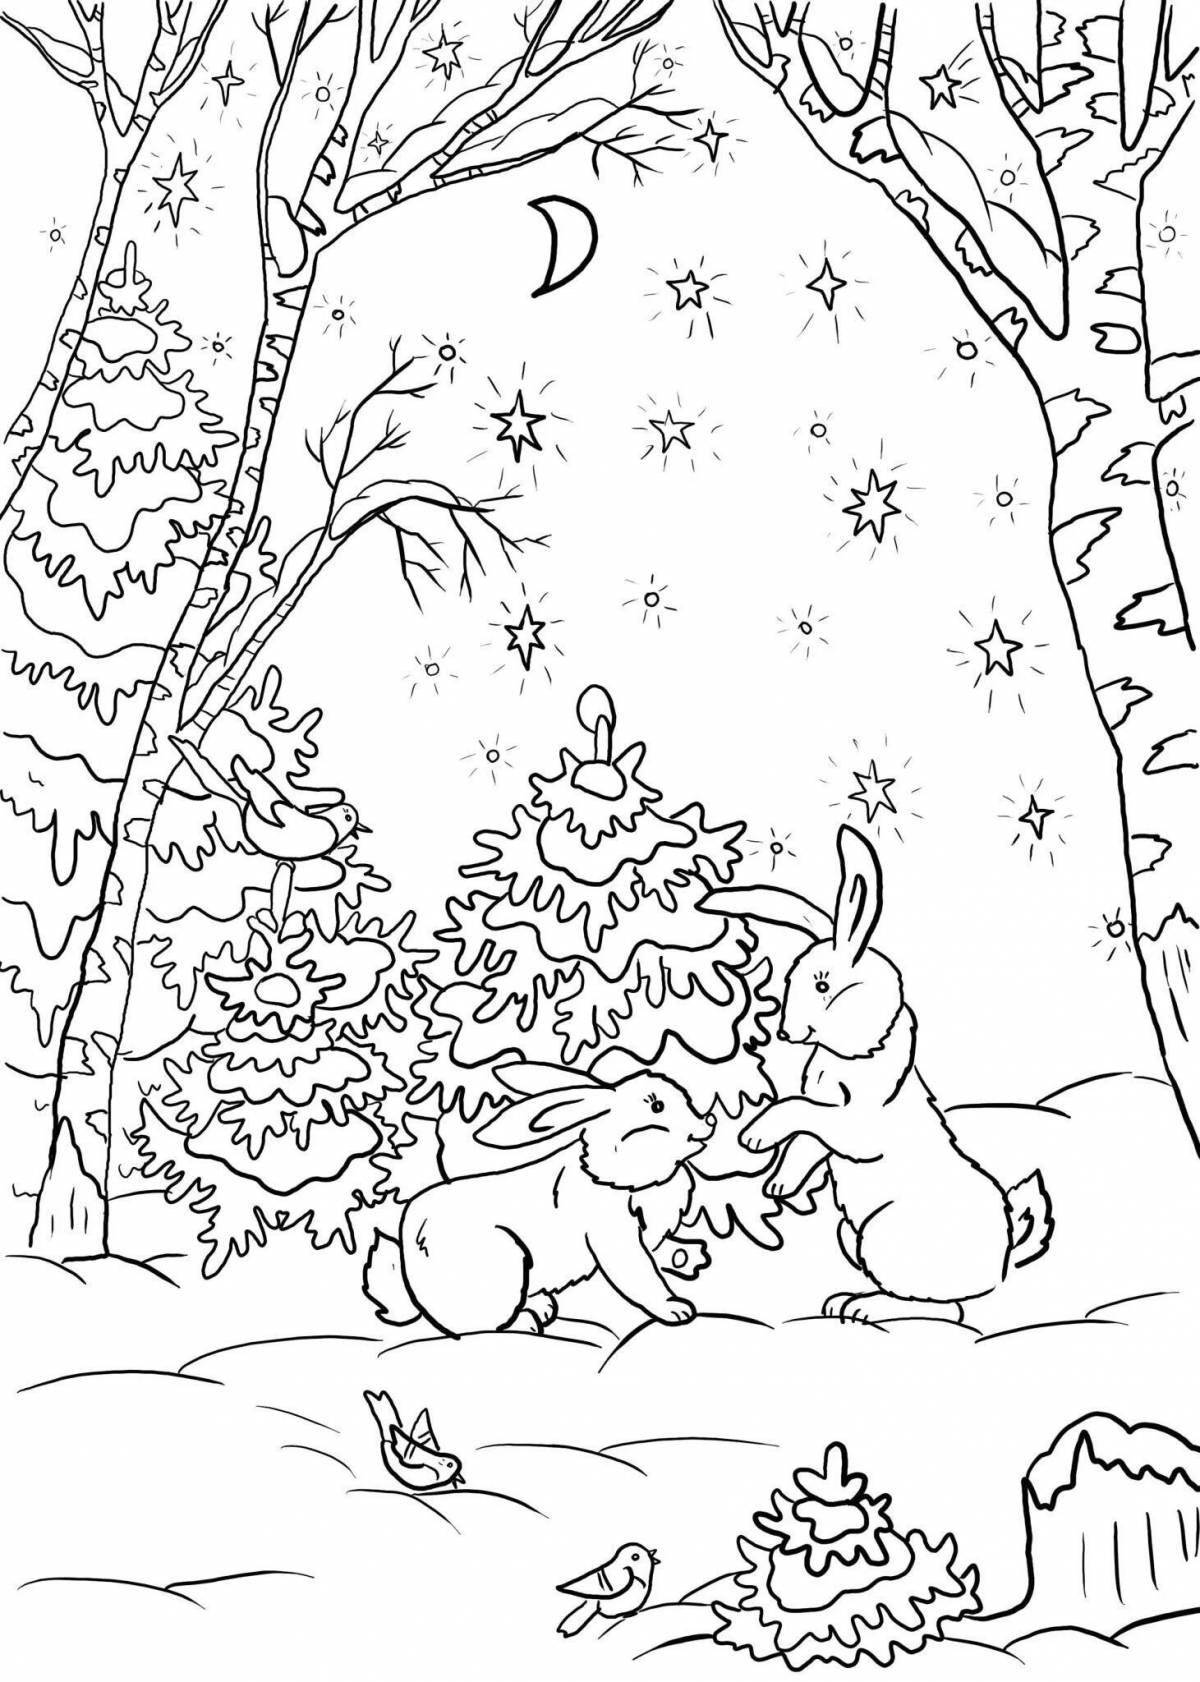 Awesome winter animal coloring pages for kids